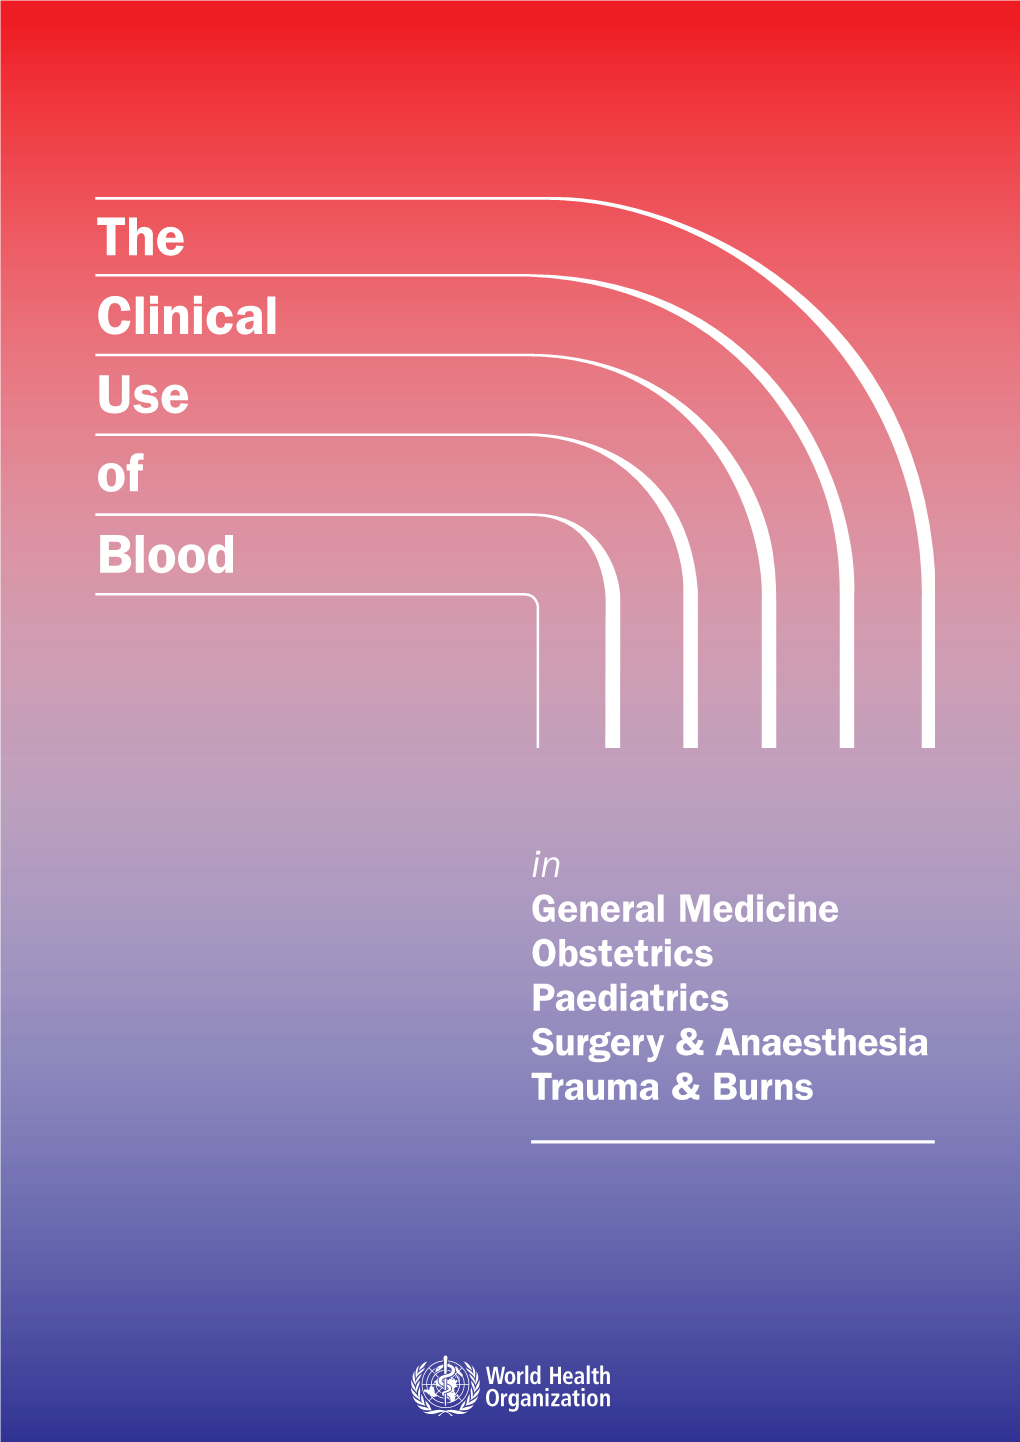 The Clinical Use of Blood